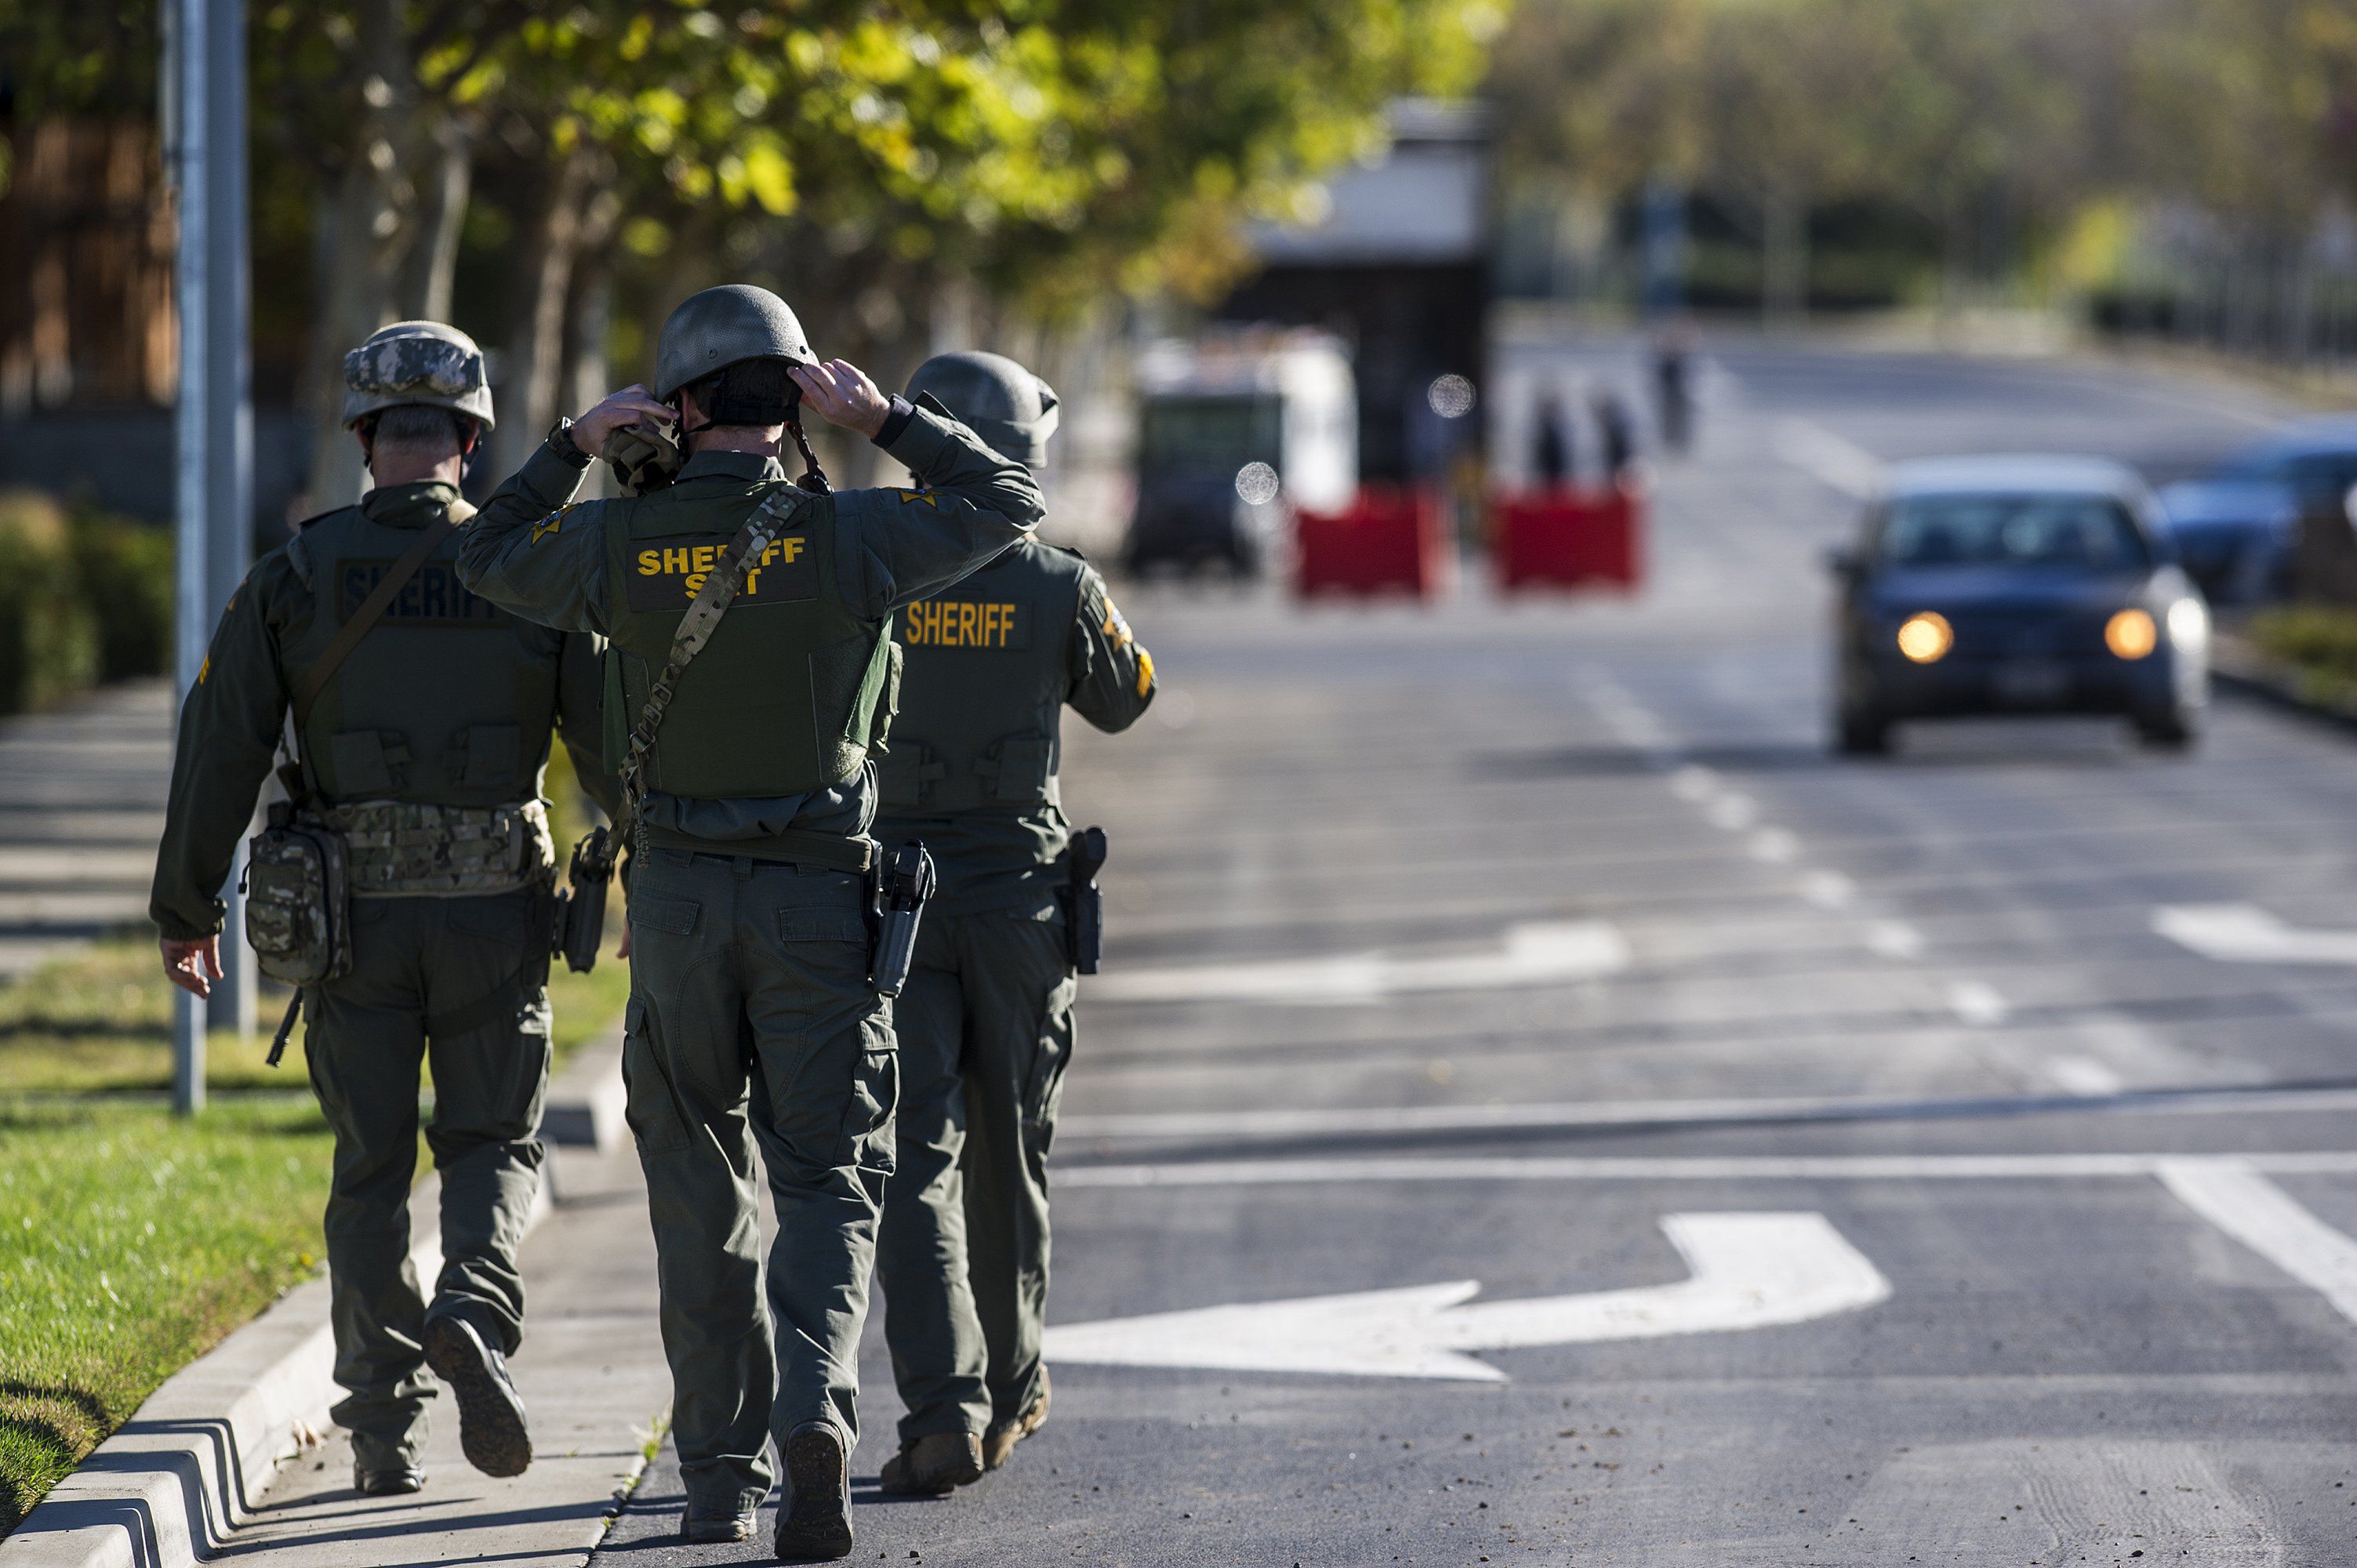 Merced County Sheriff SWAT members enter the University of California, Merced campus after a reported stabbing in Merced, Calif., Wednesday, Nov. 4, 2015. An assailant stabbed five people on the rural university campus in central California before police shot and killed him, authorities said Wednesday.  (Andrew Kuhn/Merced Sun-Star via AP)